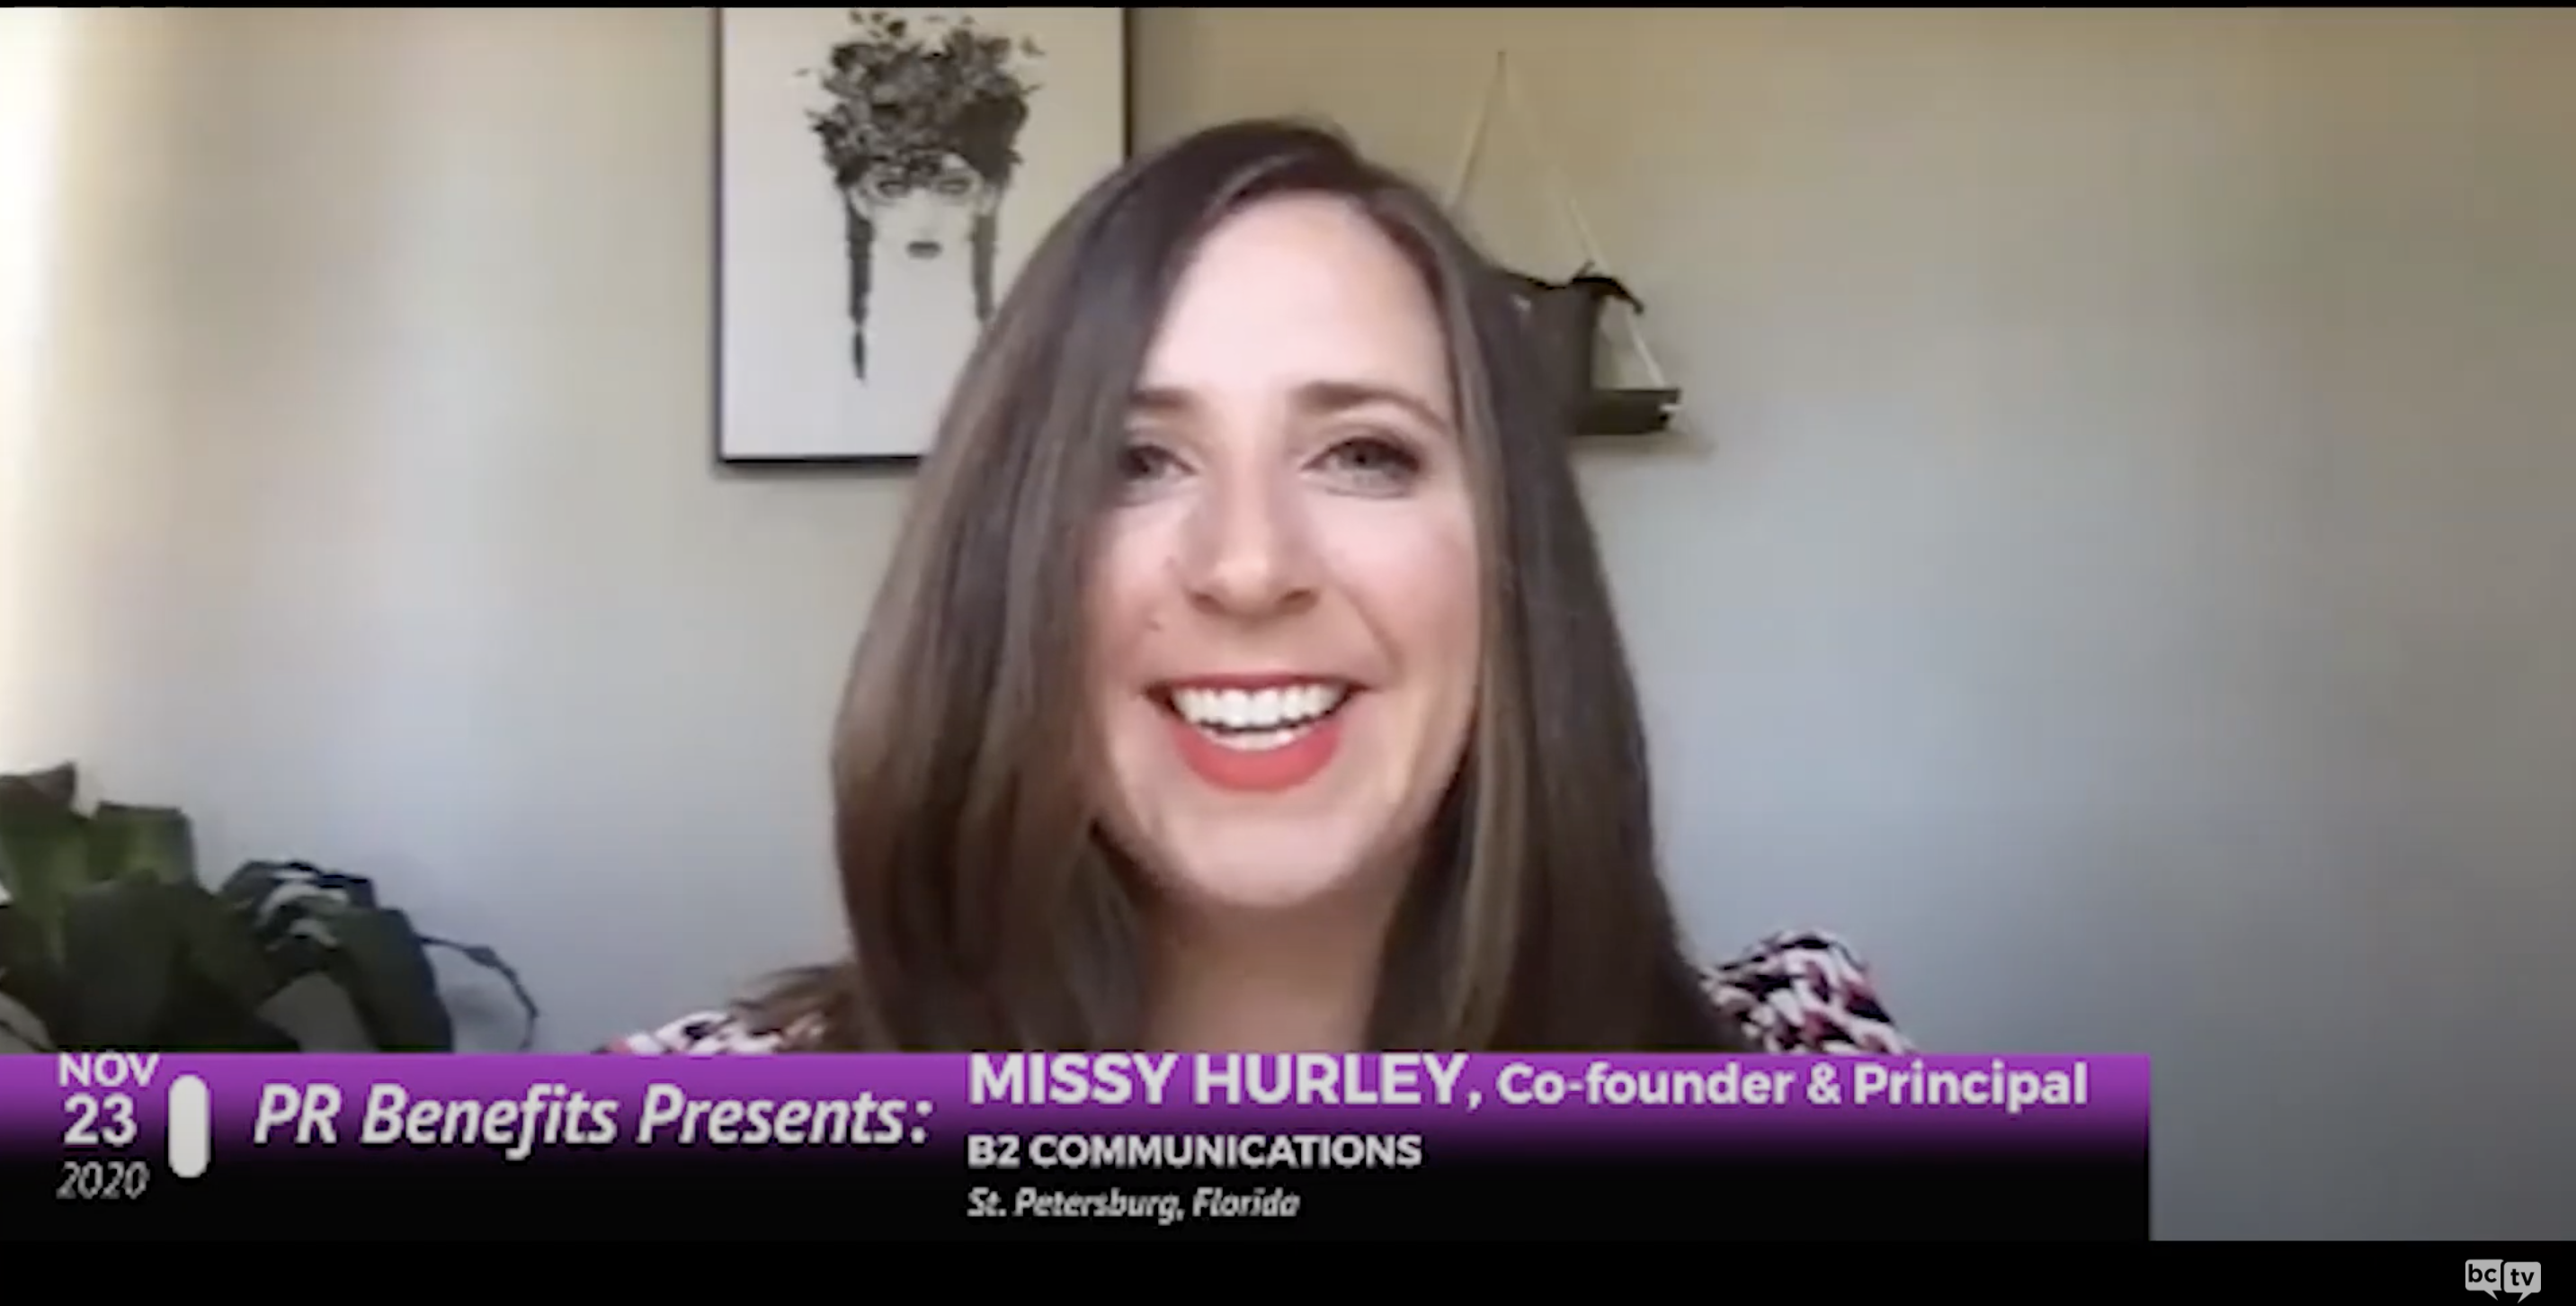 Missy Hurley on the PR Benefits show